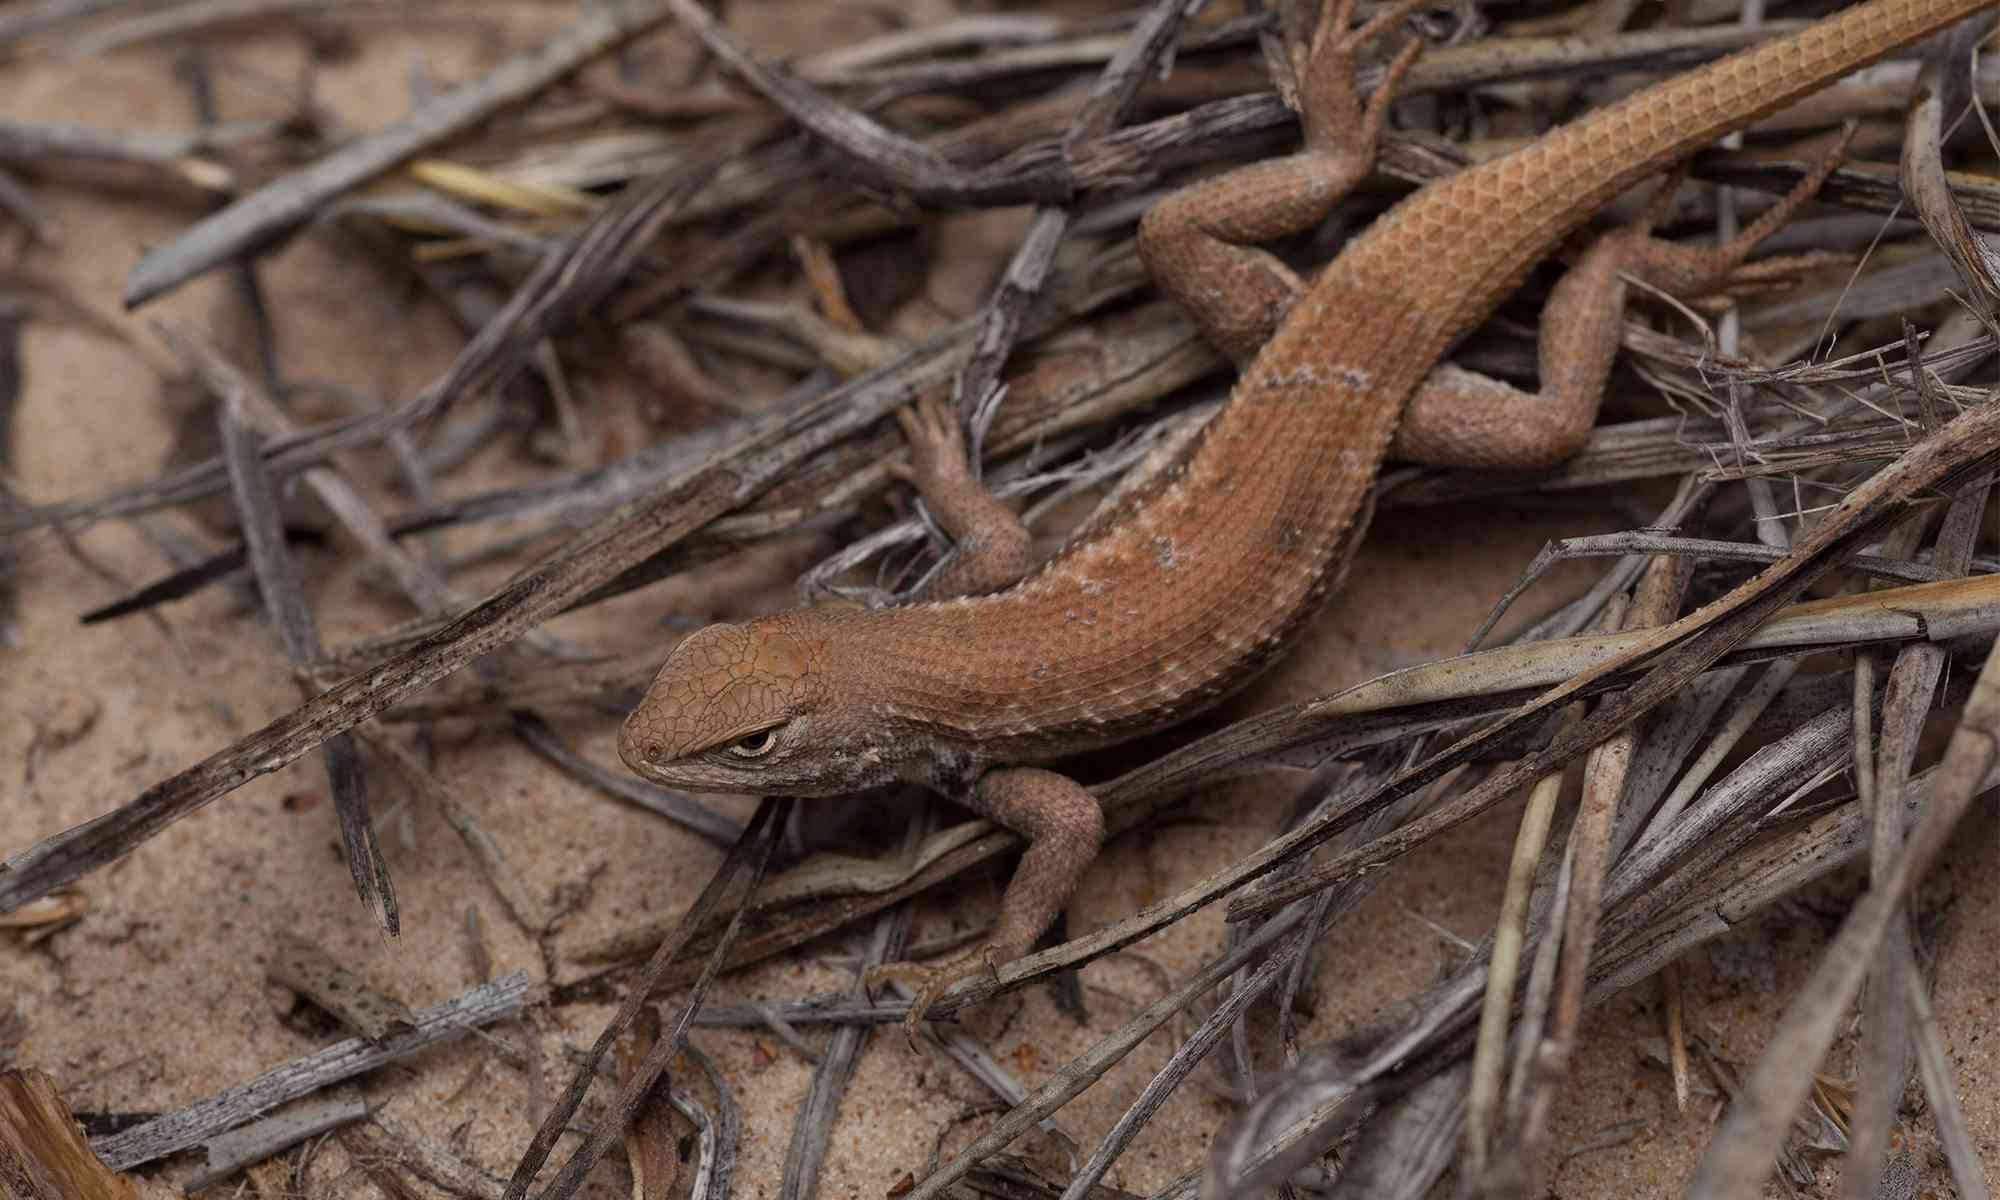 Snakes and Lizards | Defenders of Wildlife